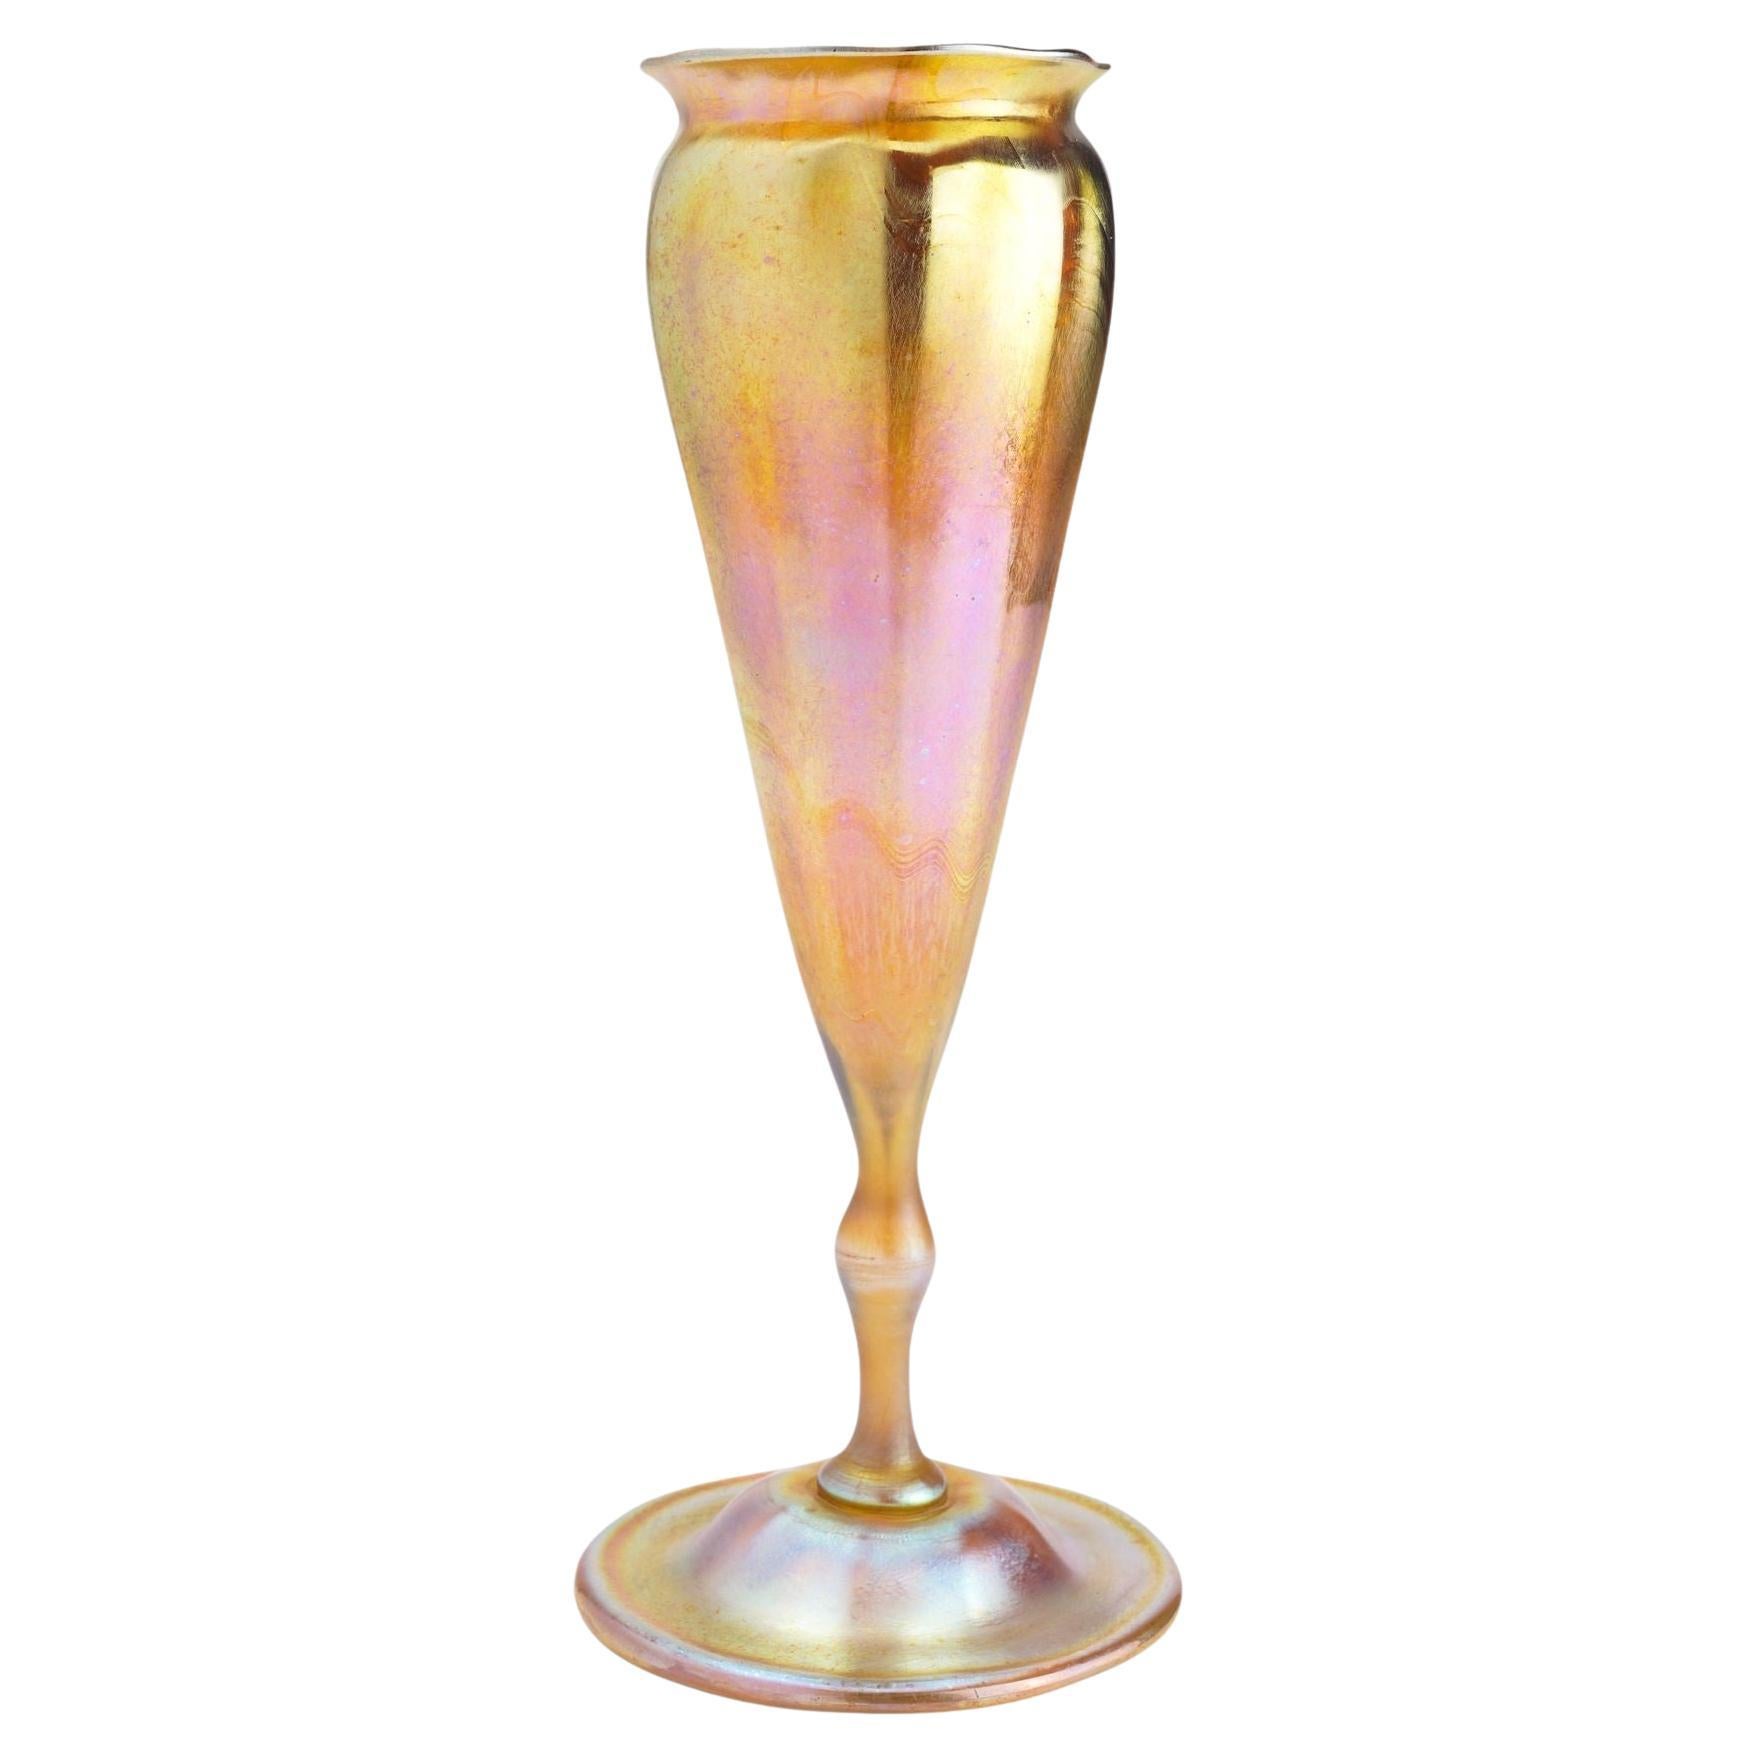 Gold Favrile trumpet vase by Louis Comfort Tiffany, 1900